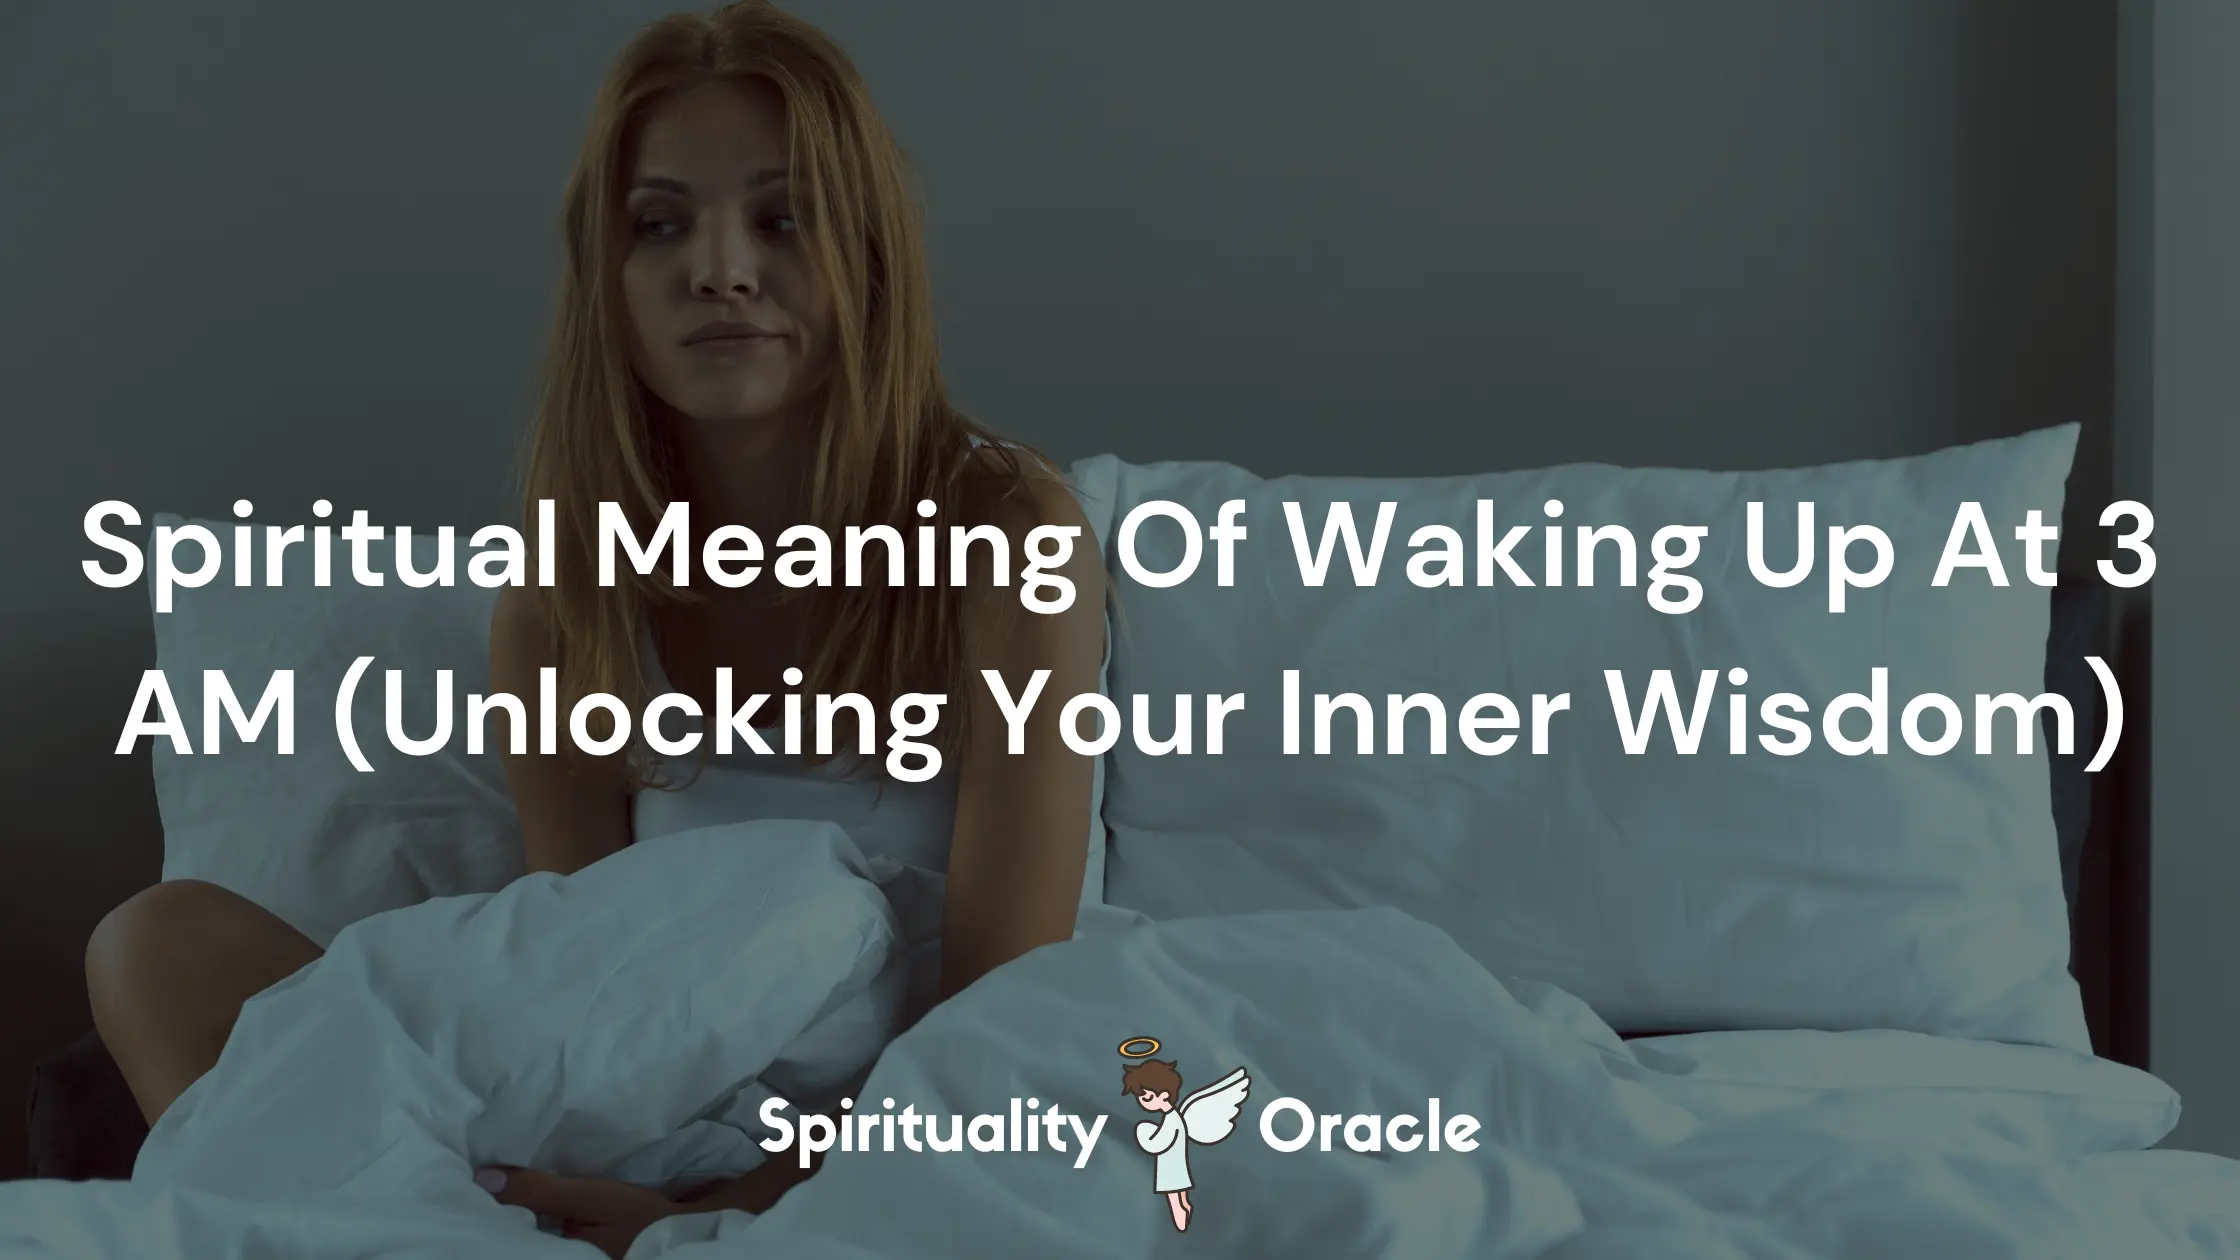 Spiritual Meaning Of Waking Up At 3 AM